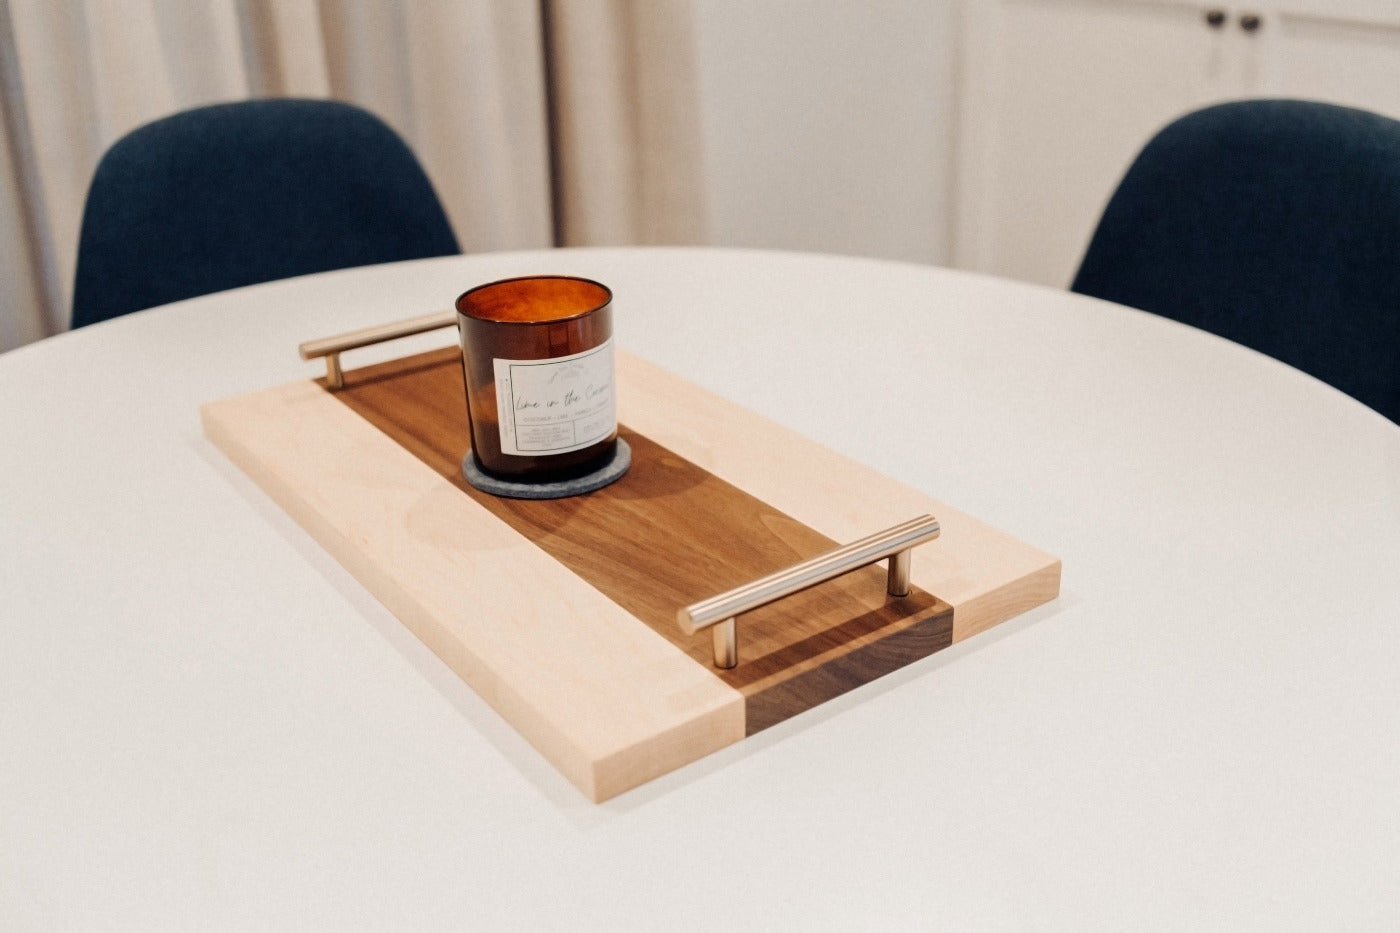 What charcuterie board dreams are made of. This solid hardwood Maple & Walnut serving tray is a versatile and functional work of art.